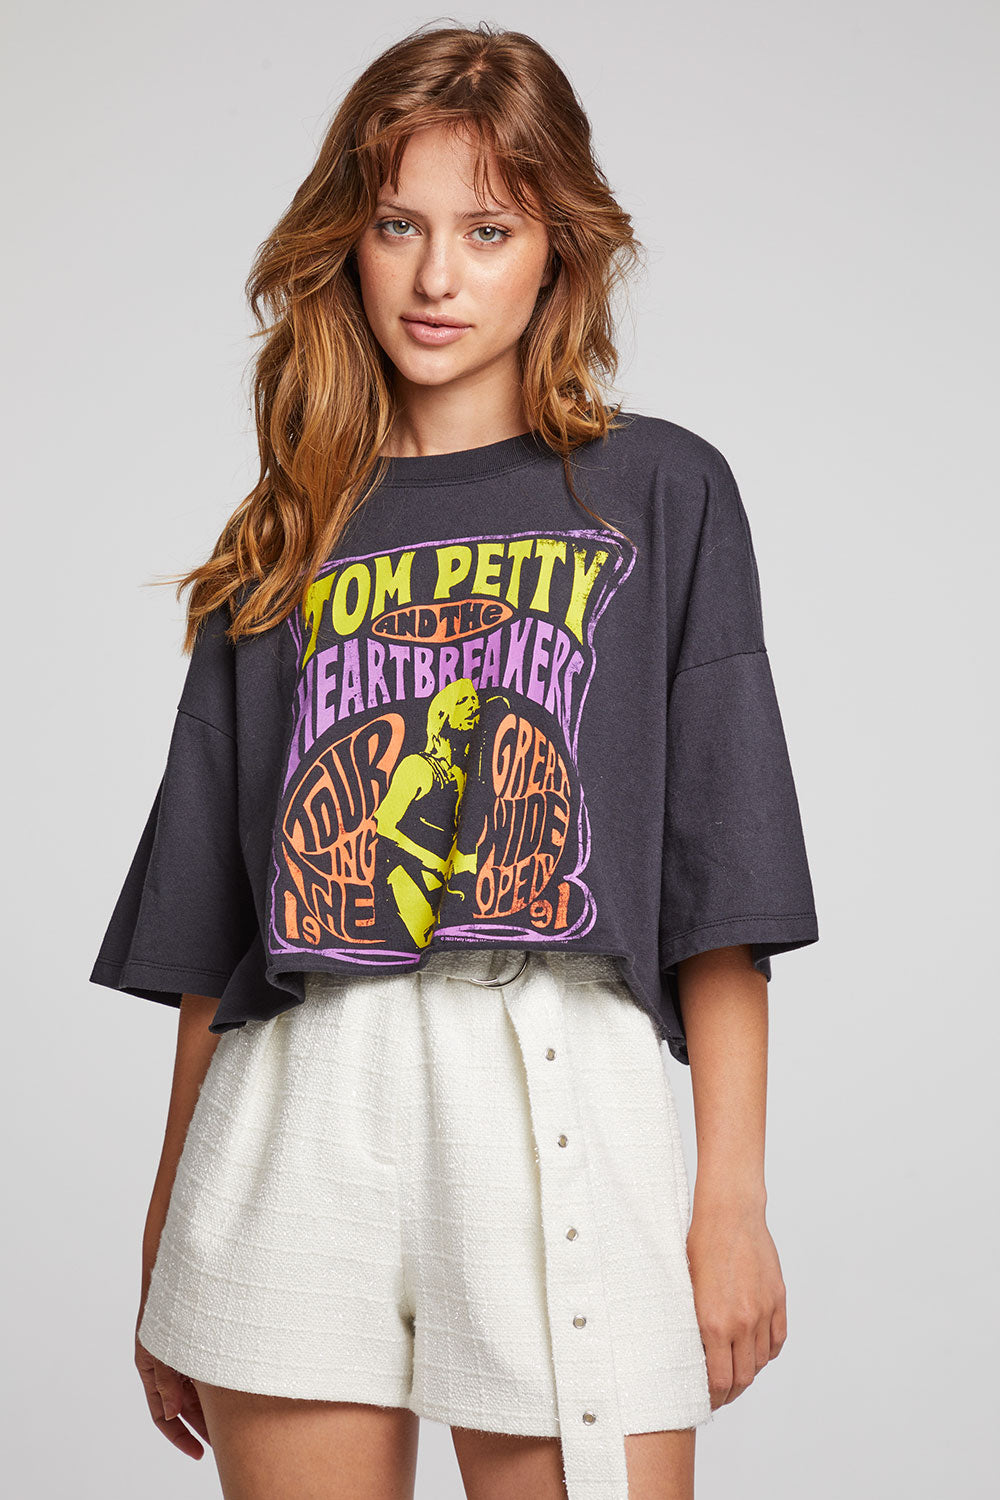 Tom Petty Great Wide Open Tour Shine Tee WOMENS chaserbrand